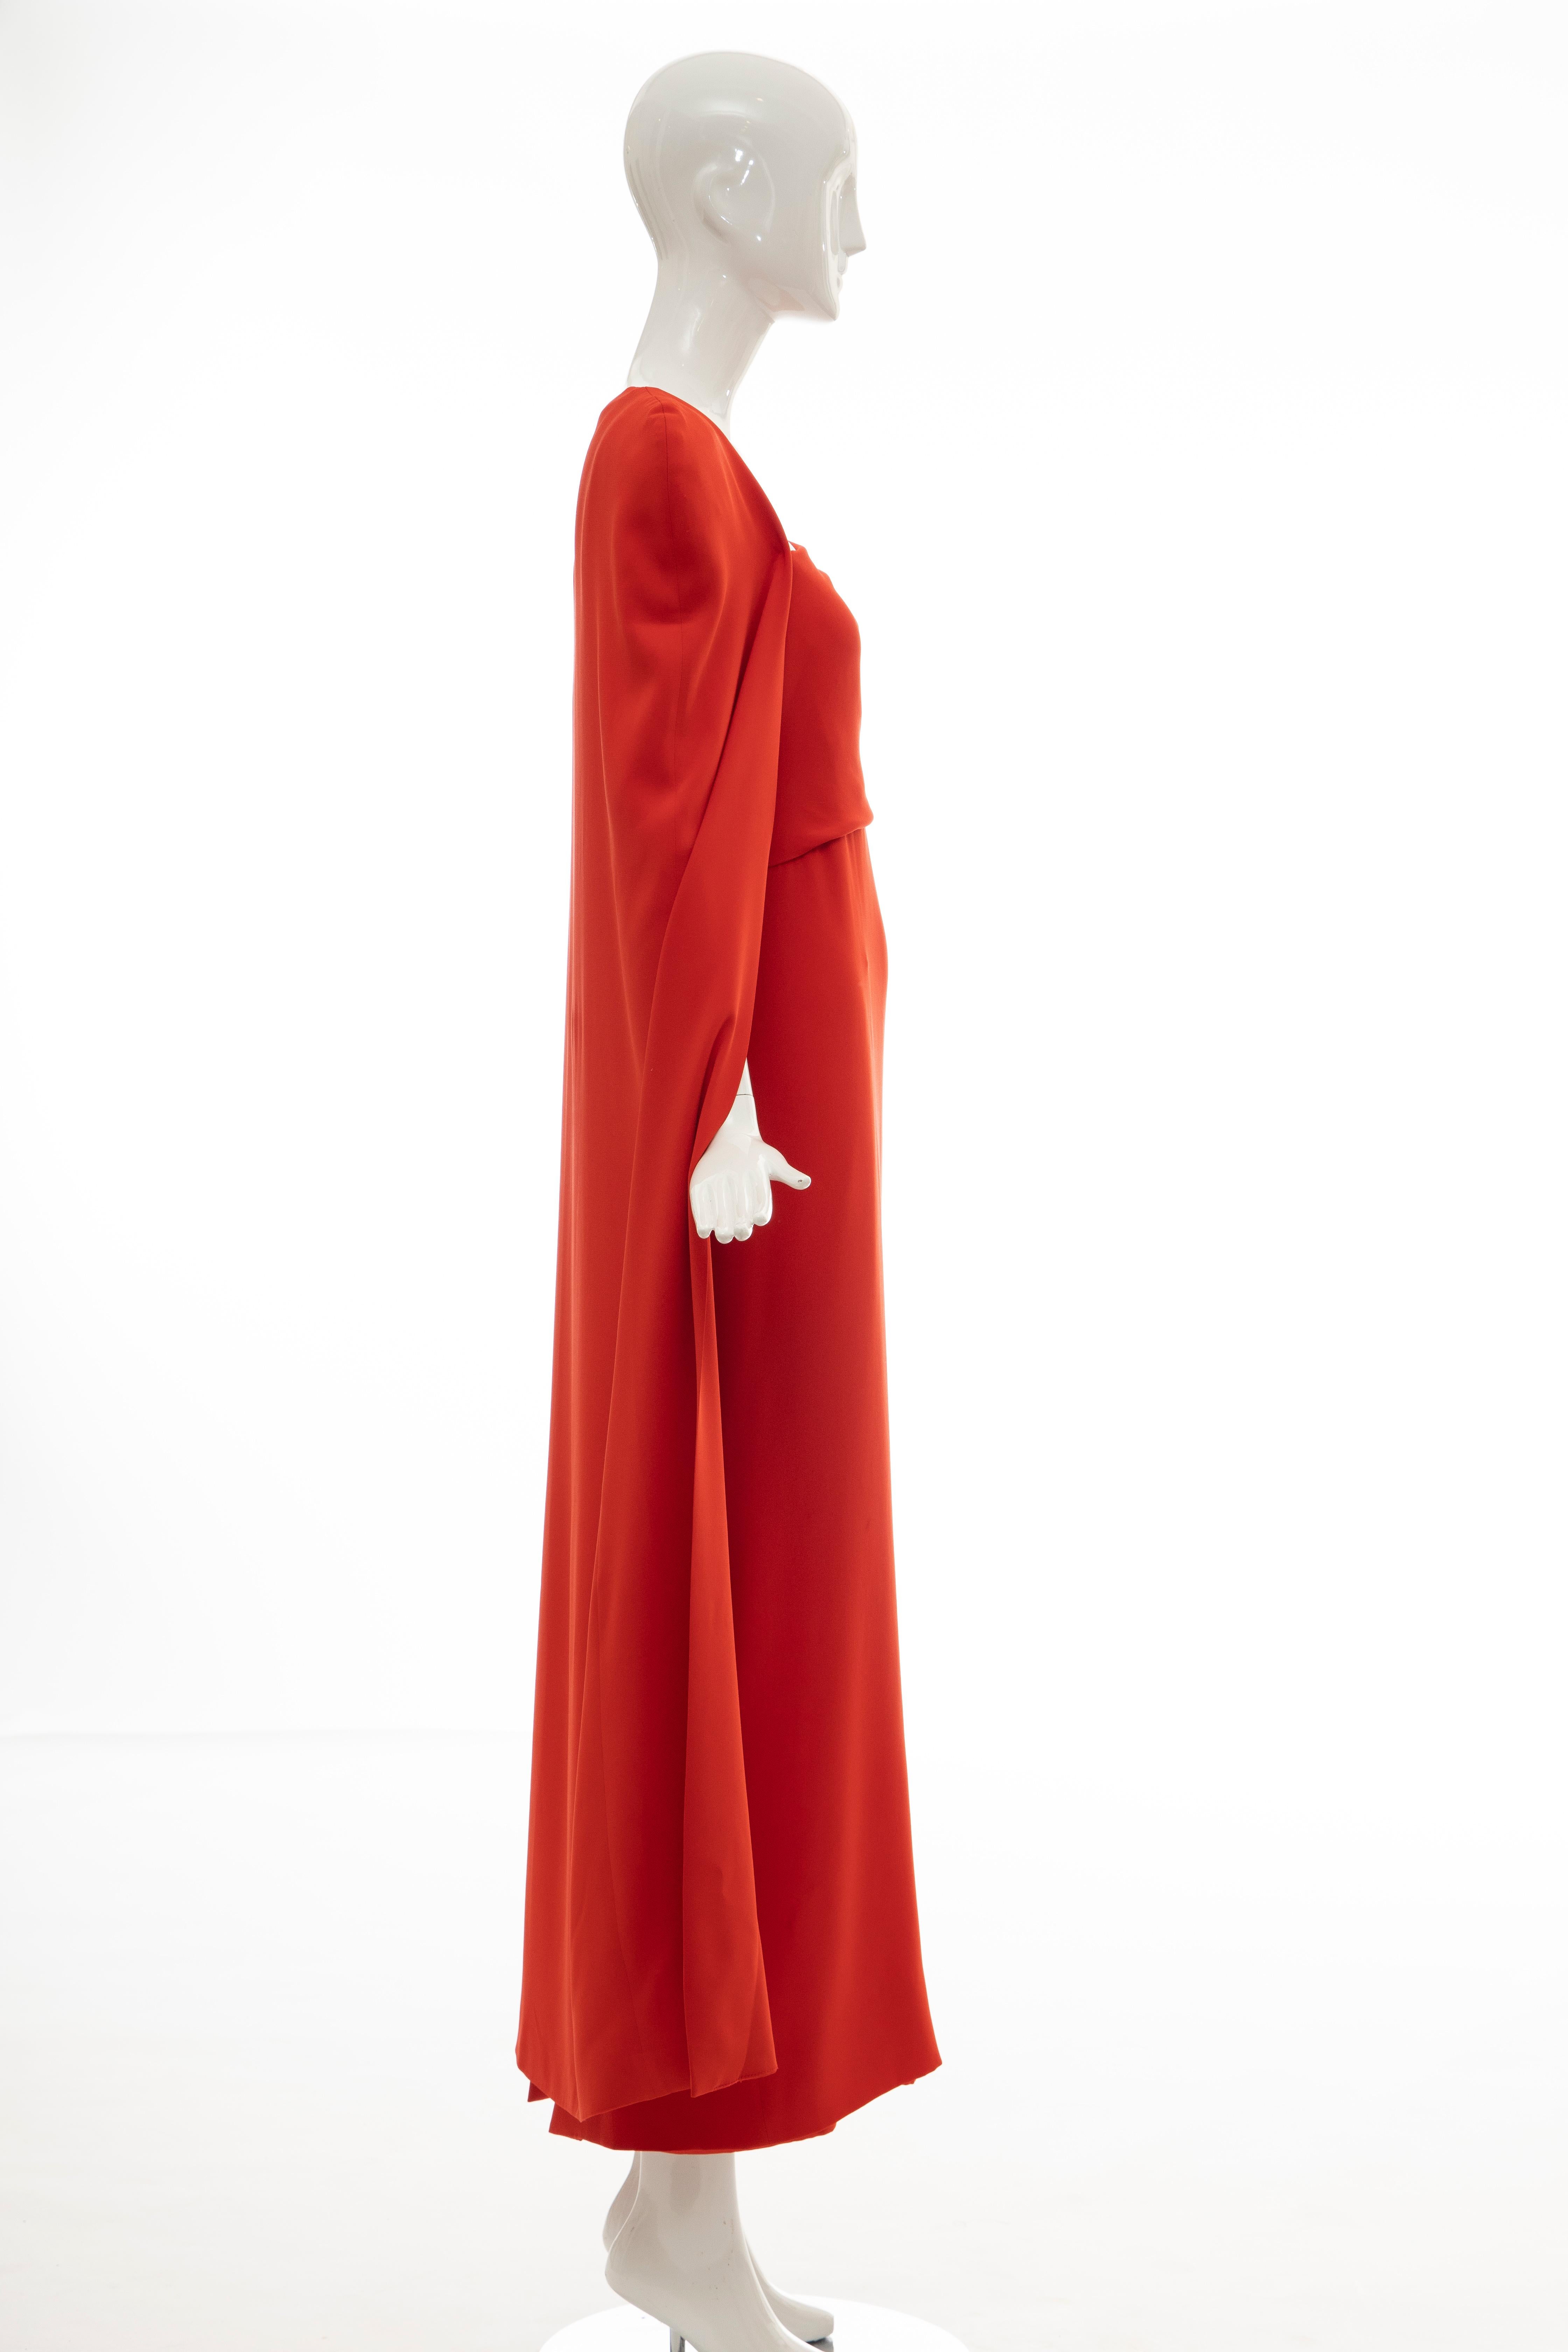 Women's Tom Ford Runway Silk Persimmon Evening Dress With Cape, Fall 2012